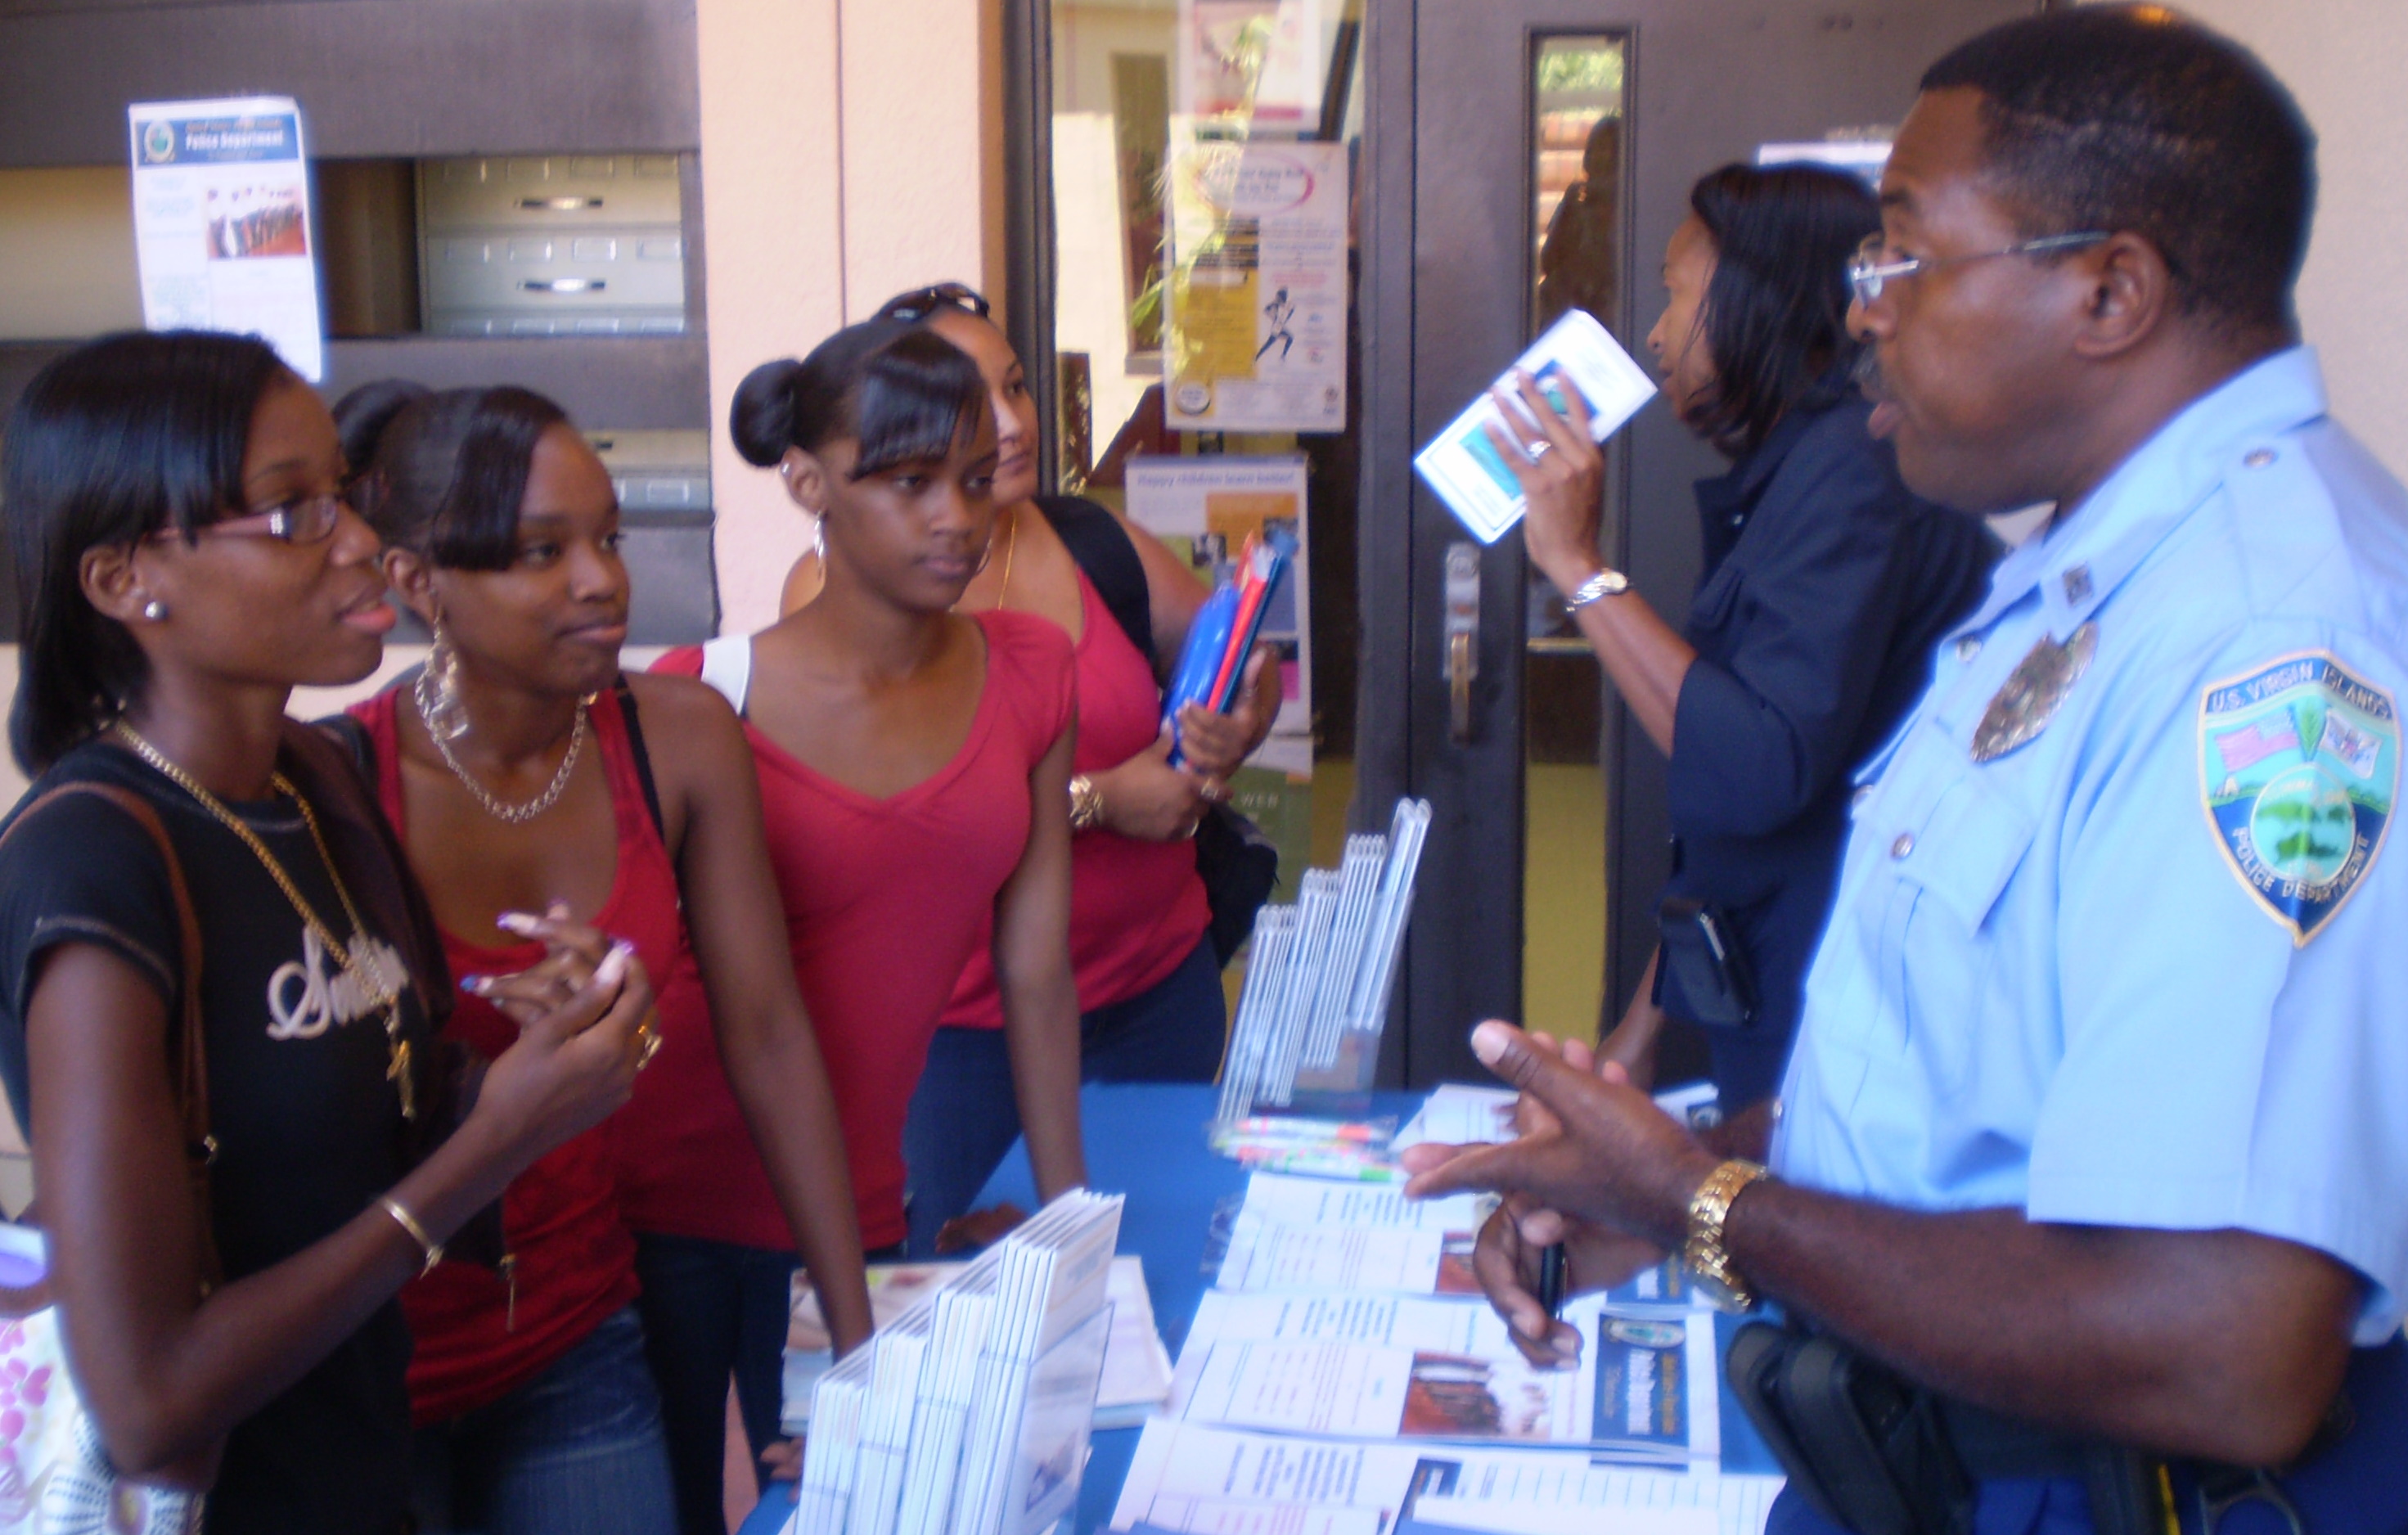 VIPD Officer Samuel Gittens talks to UVI students about a future career in policing.